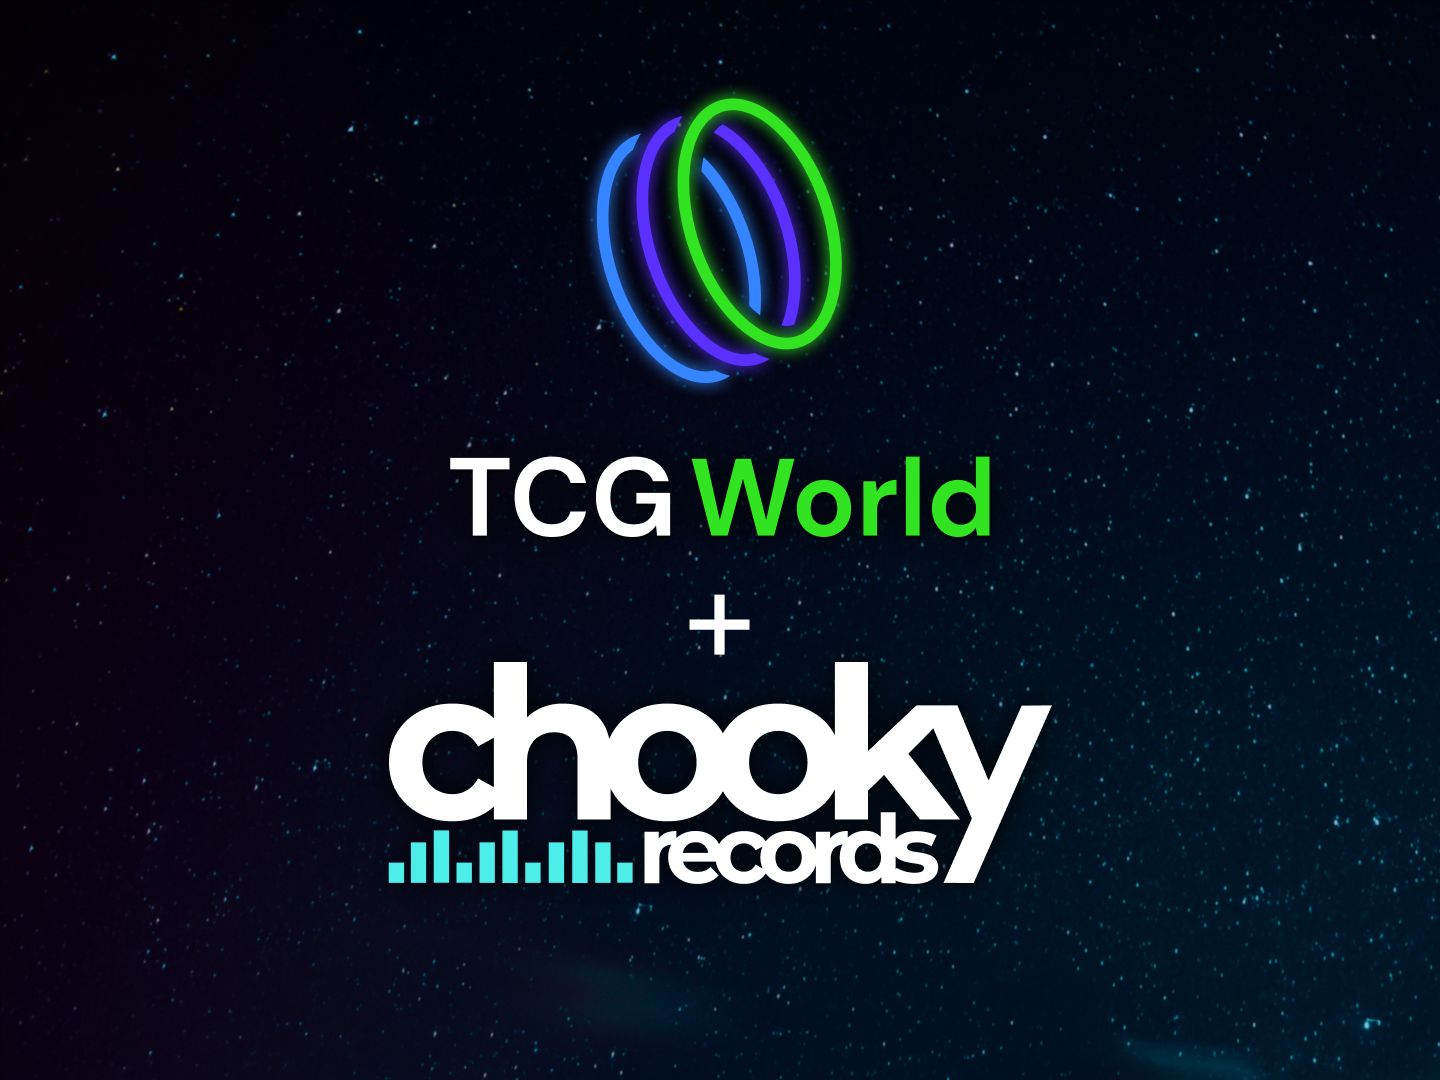 TCG World Announces Partnership with Chooky Records to Revolutionize Entertainment in the Metaverse